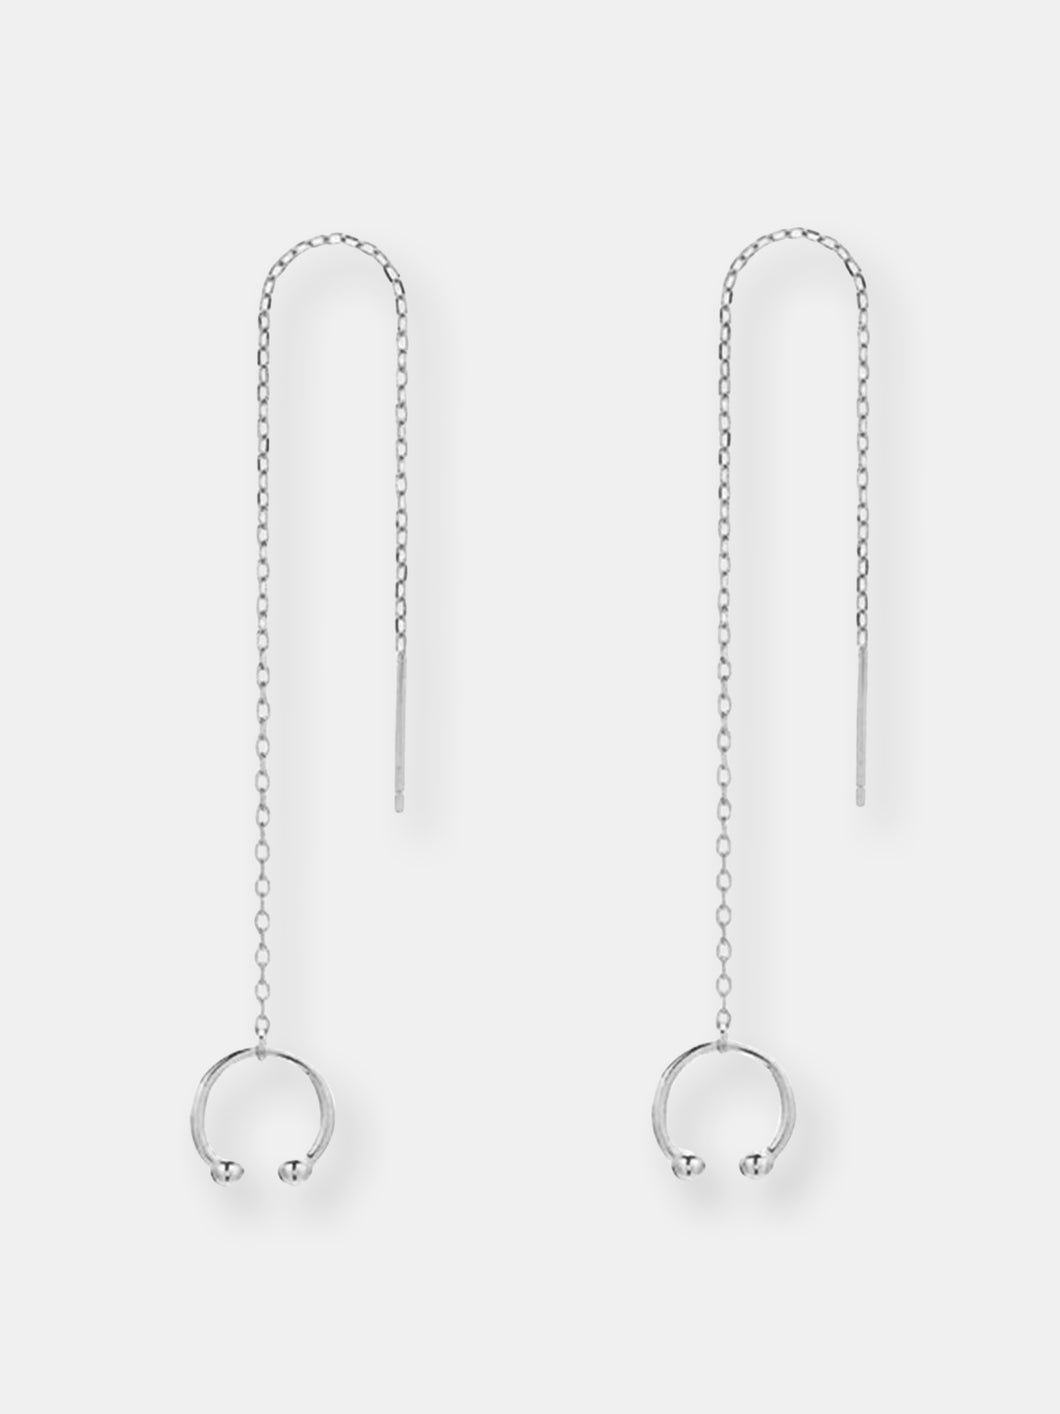 Sterling Silver Simple Ear Cuff with Threader Earrings